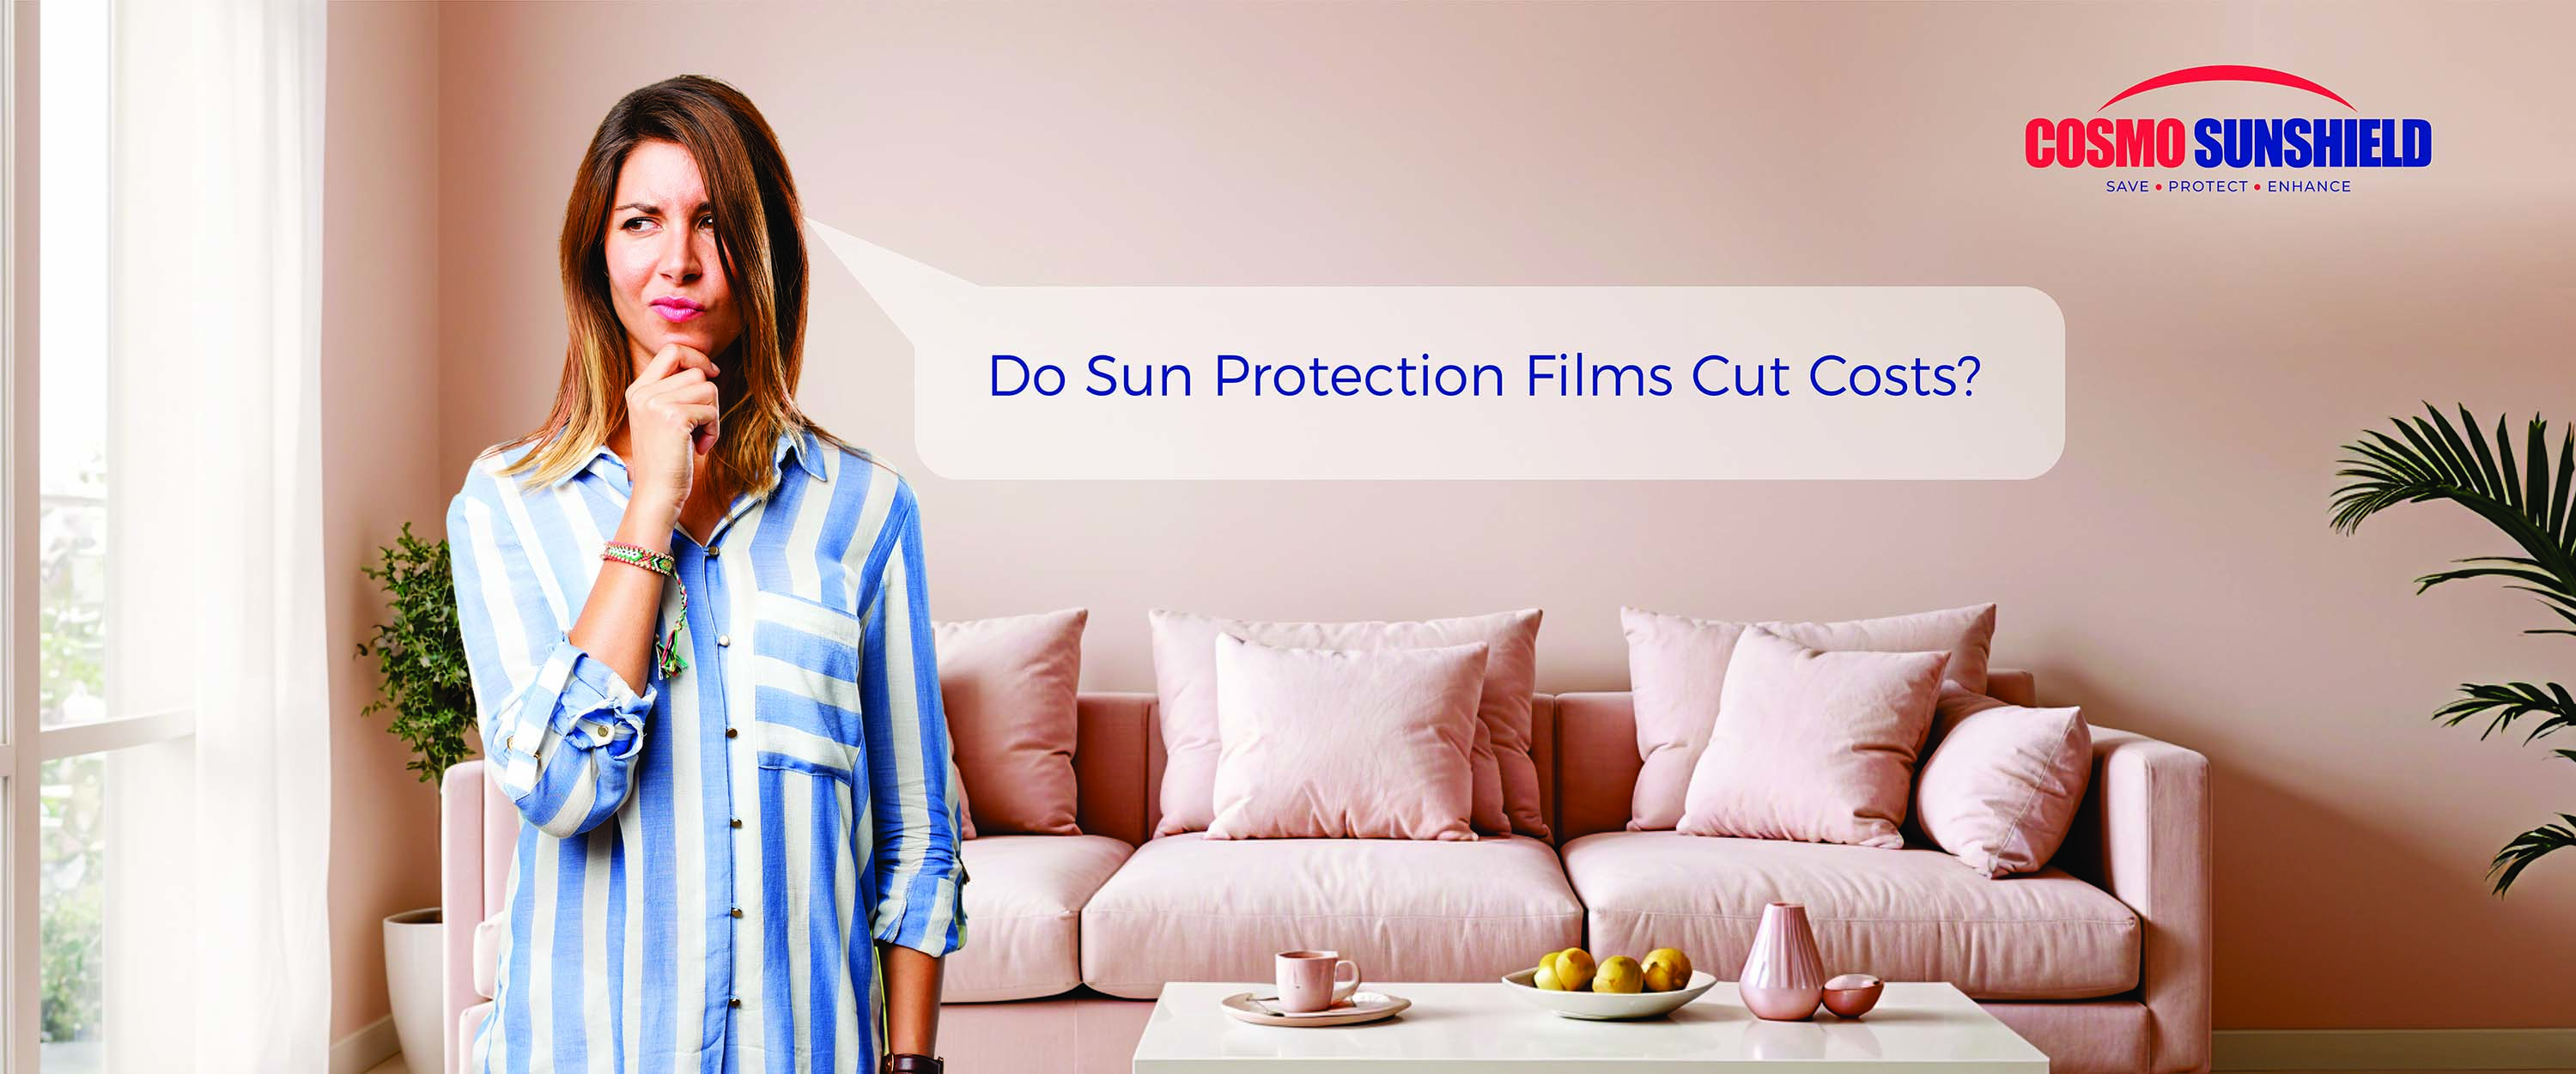 Do Sun Protection Films Cut Costs